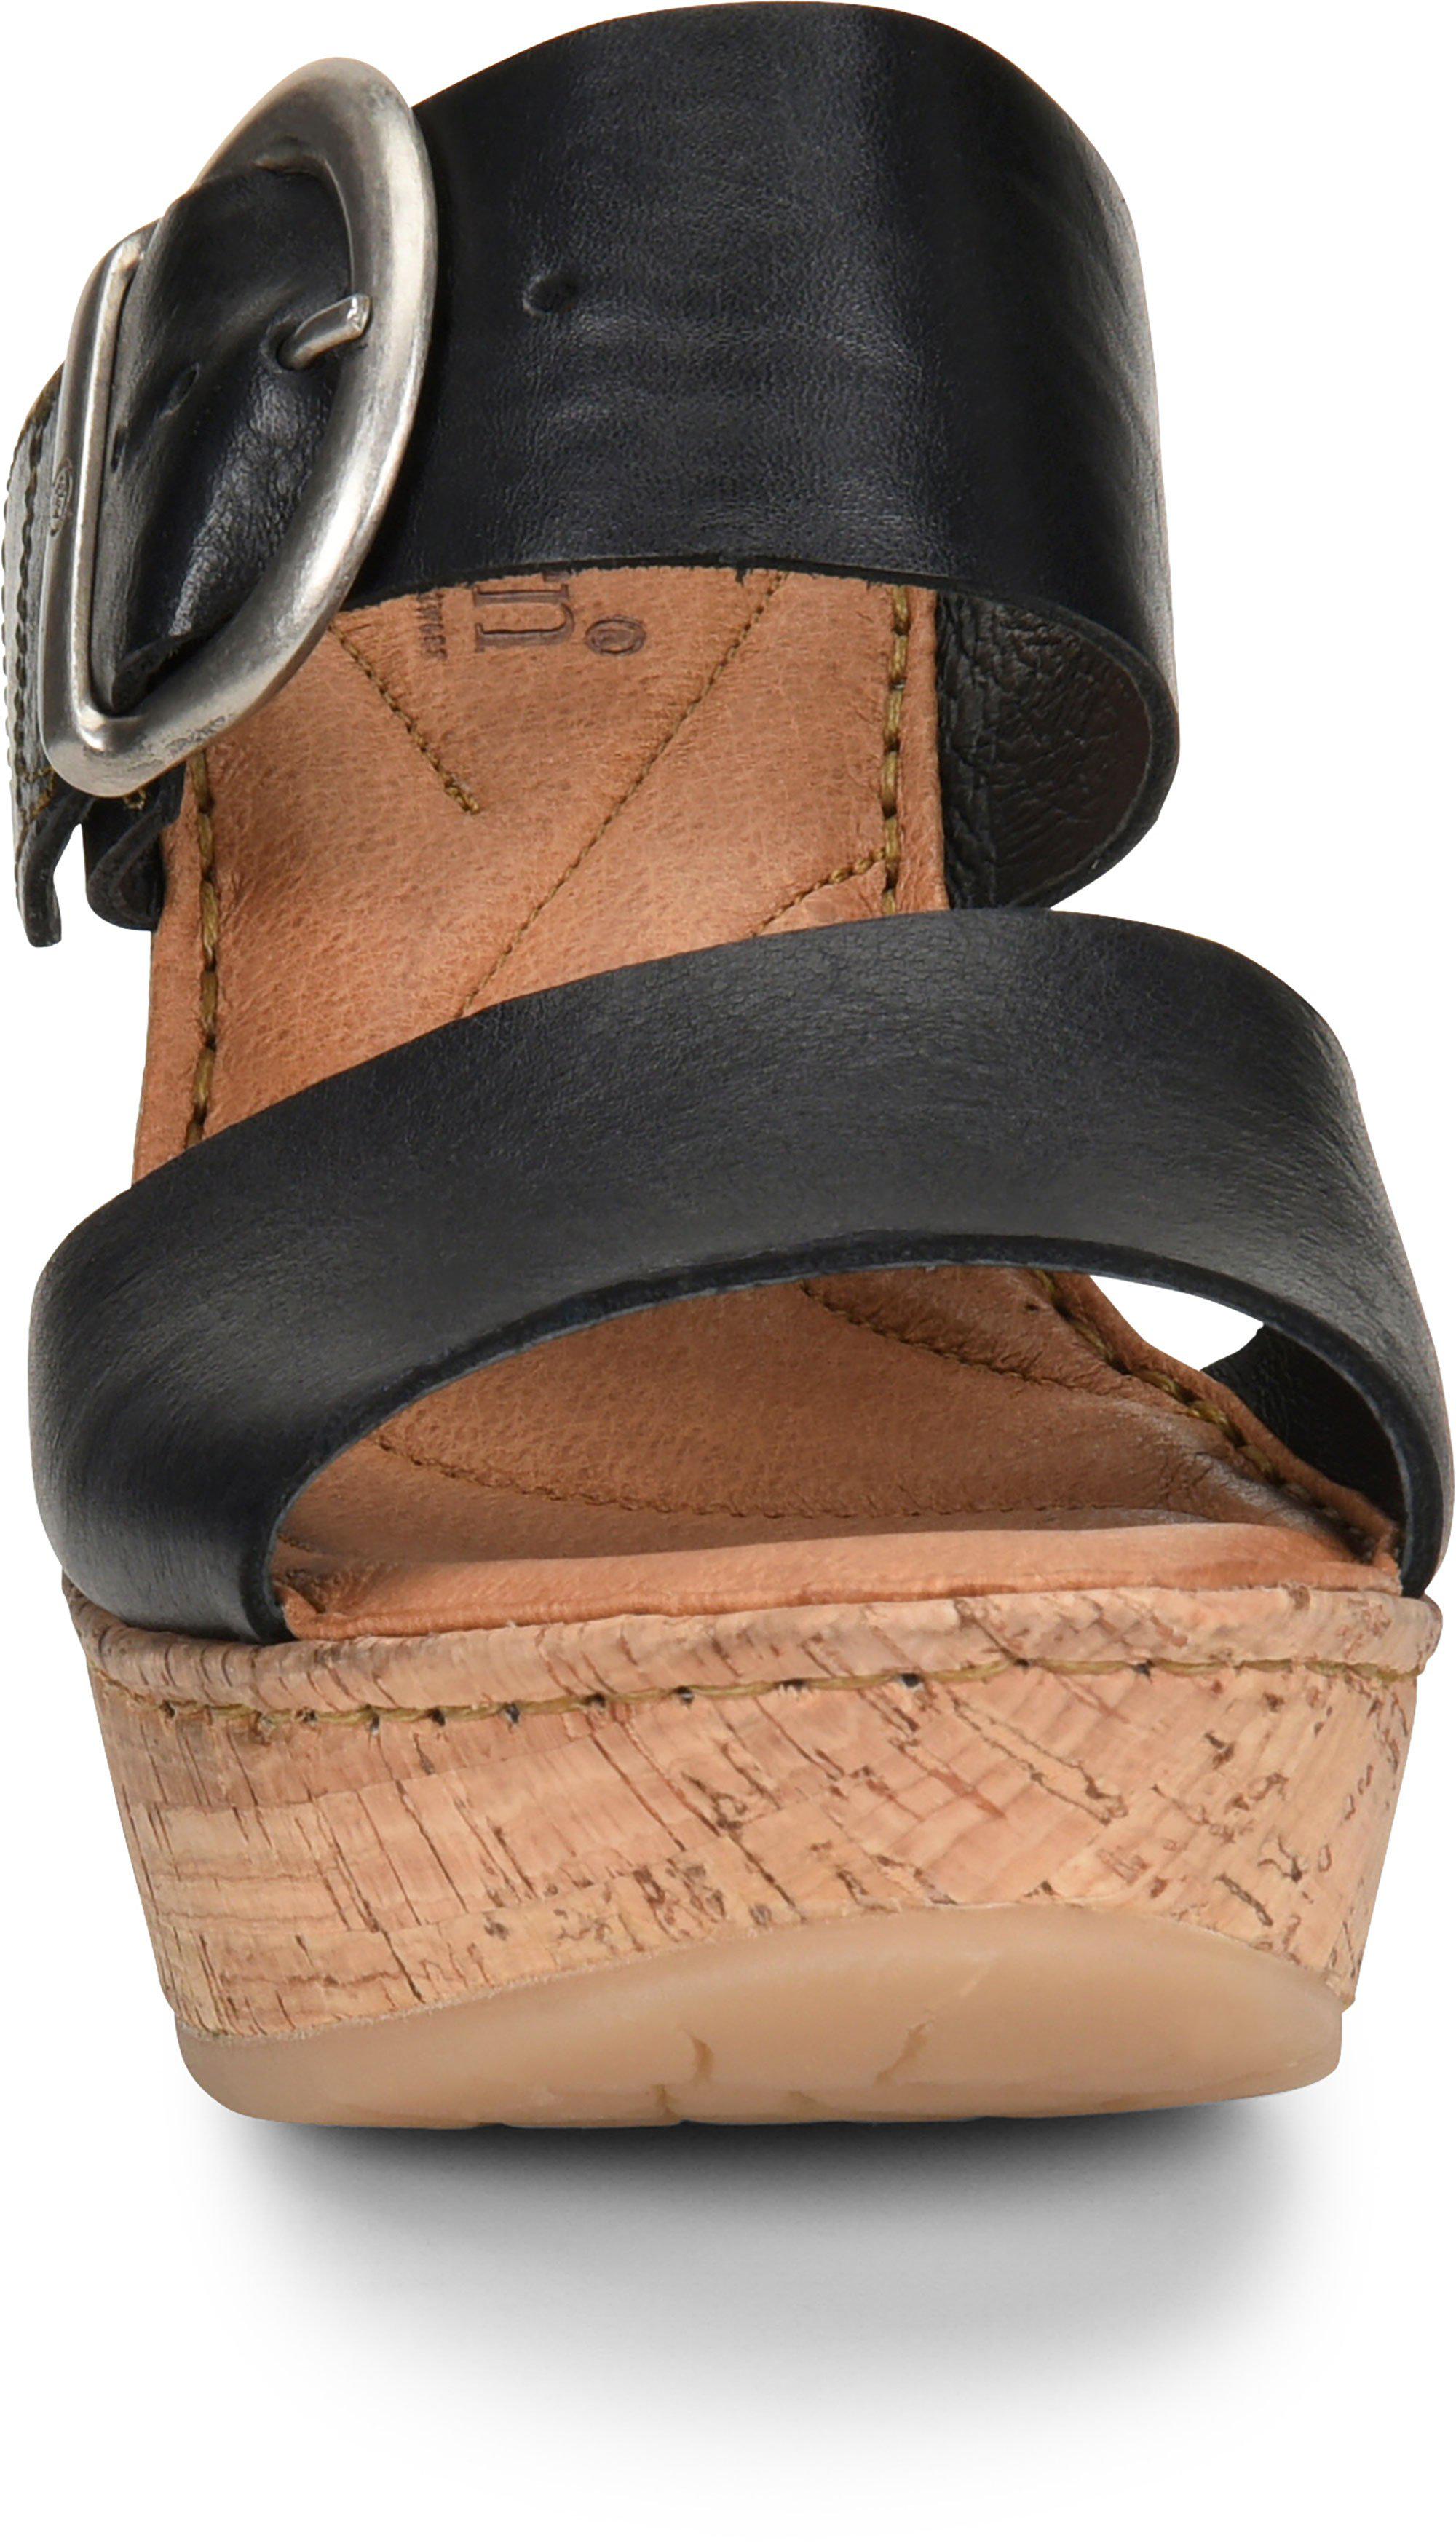 born wedge shoes